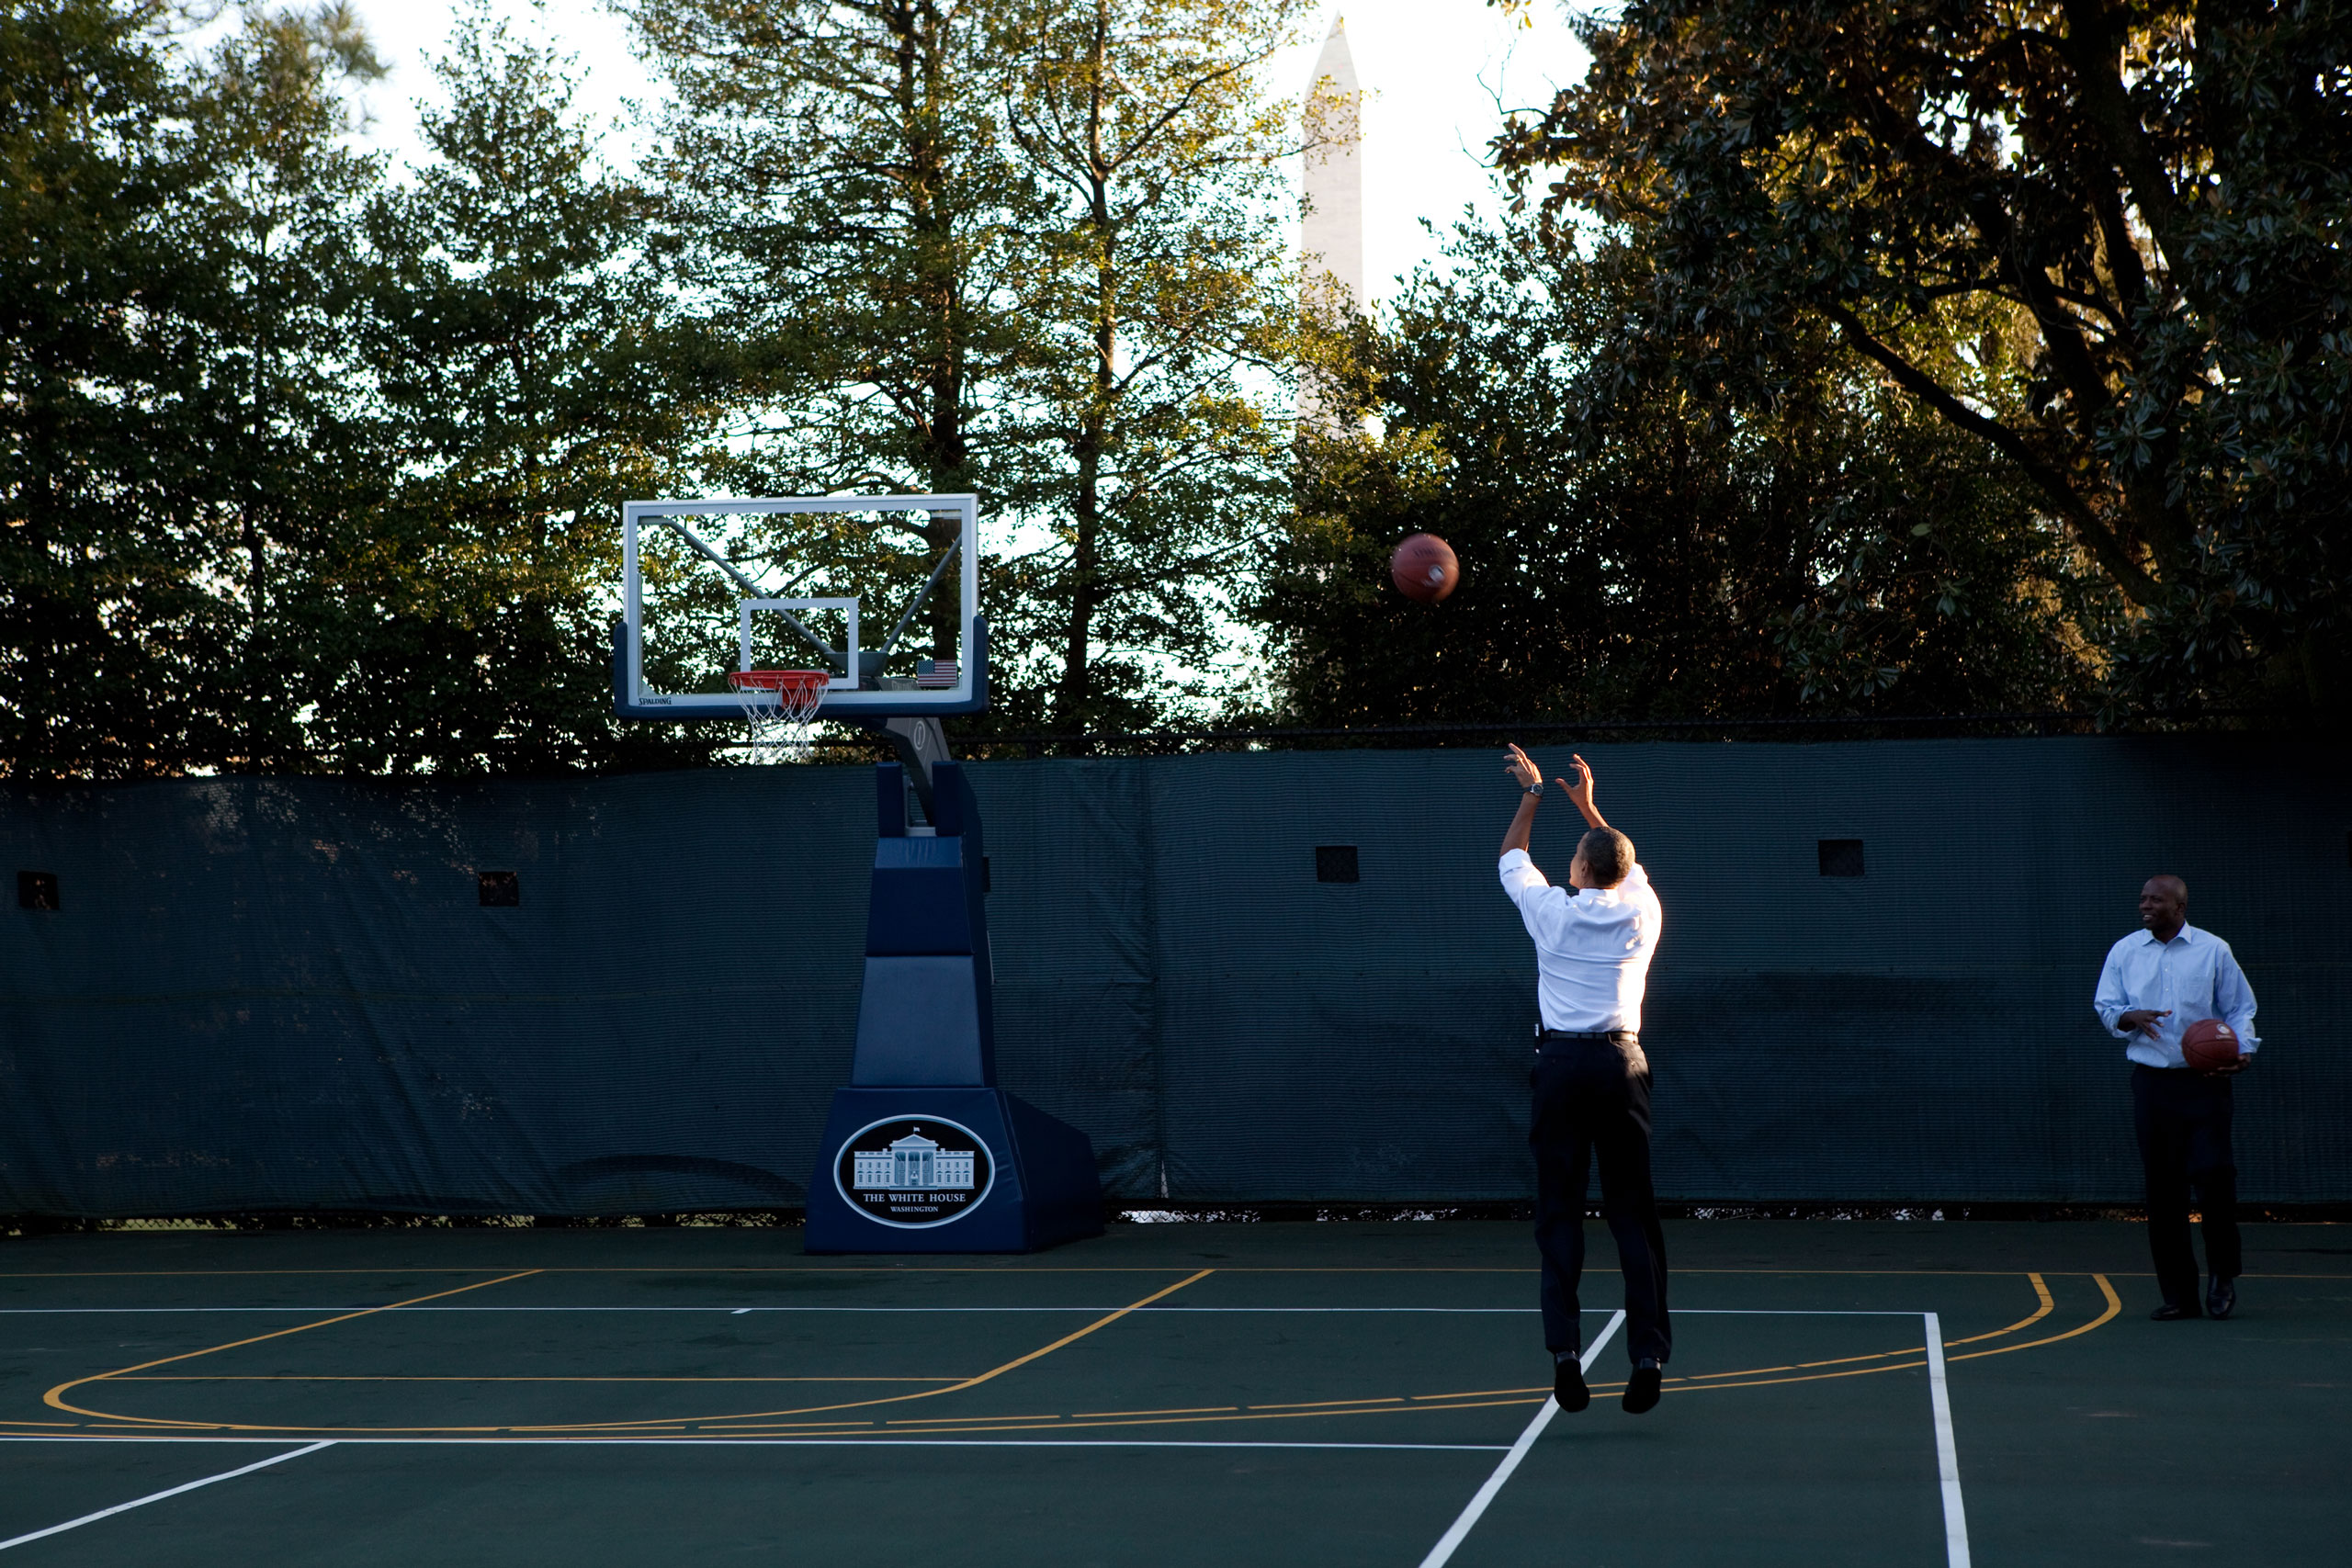 President Barack Obama shoots hoops with his personal aide, Reggie Love, at the White House basketball court, Jan. 18, 2010.